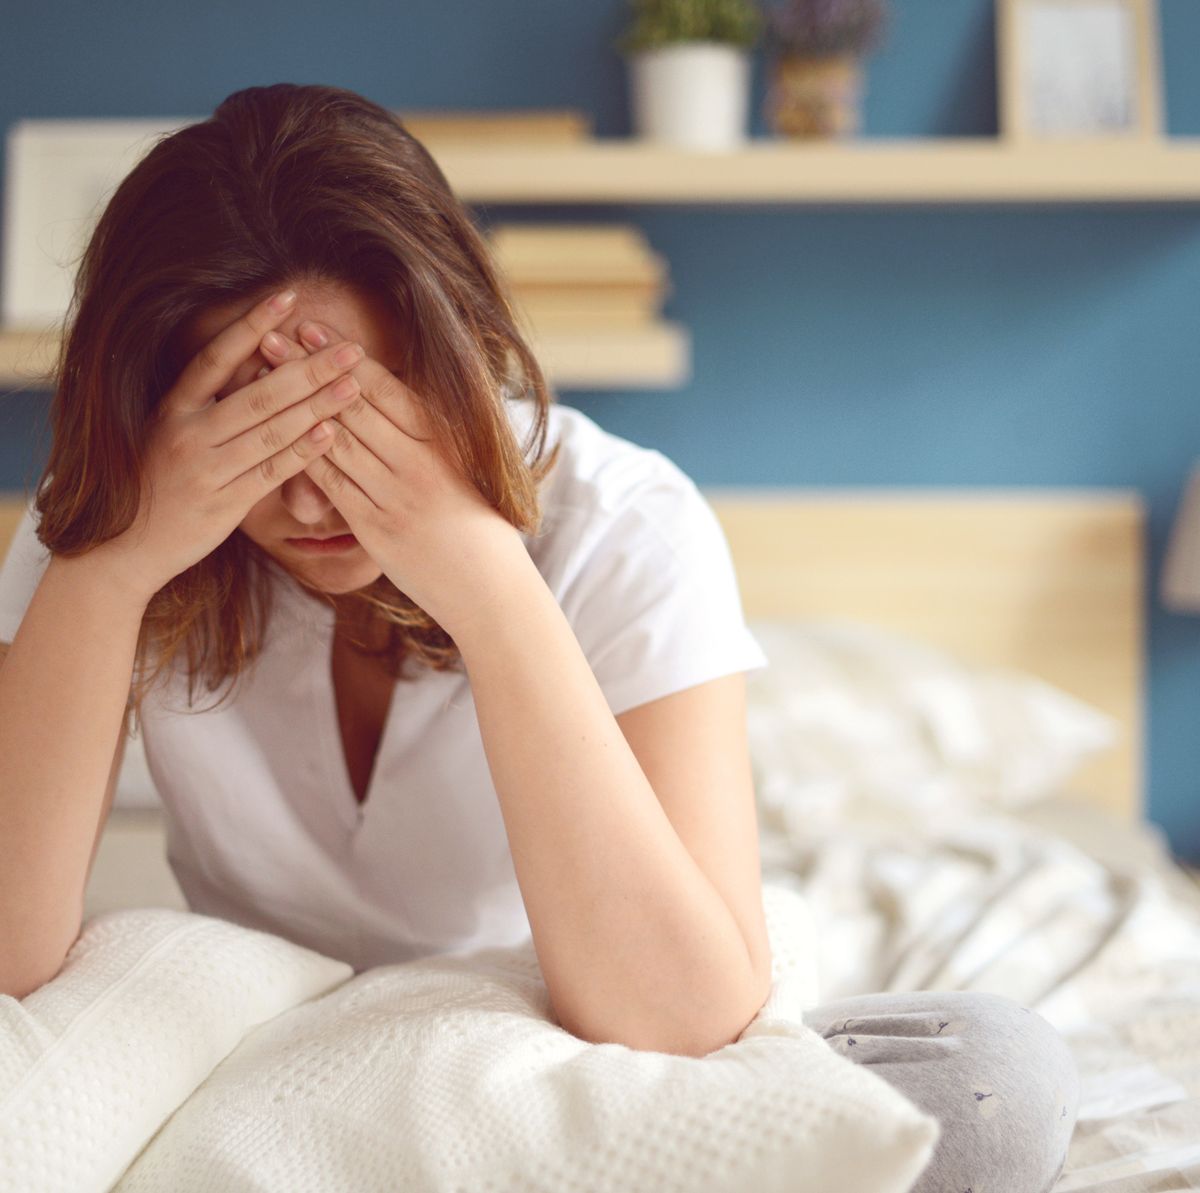 6 Physical Symptoms of Anxiety to Know, According to Experts